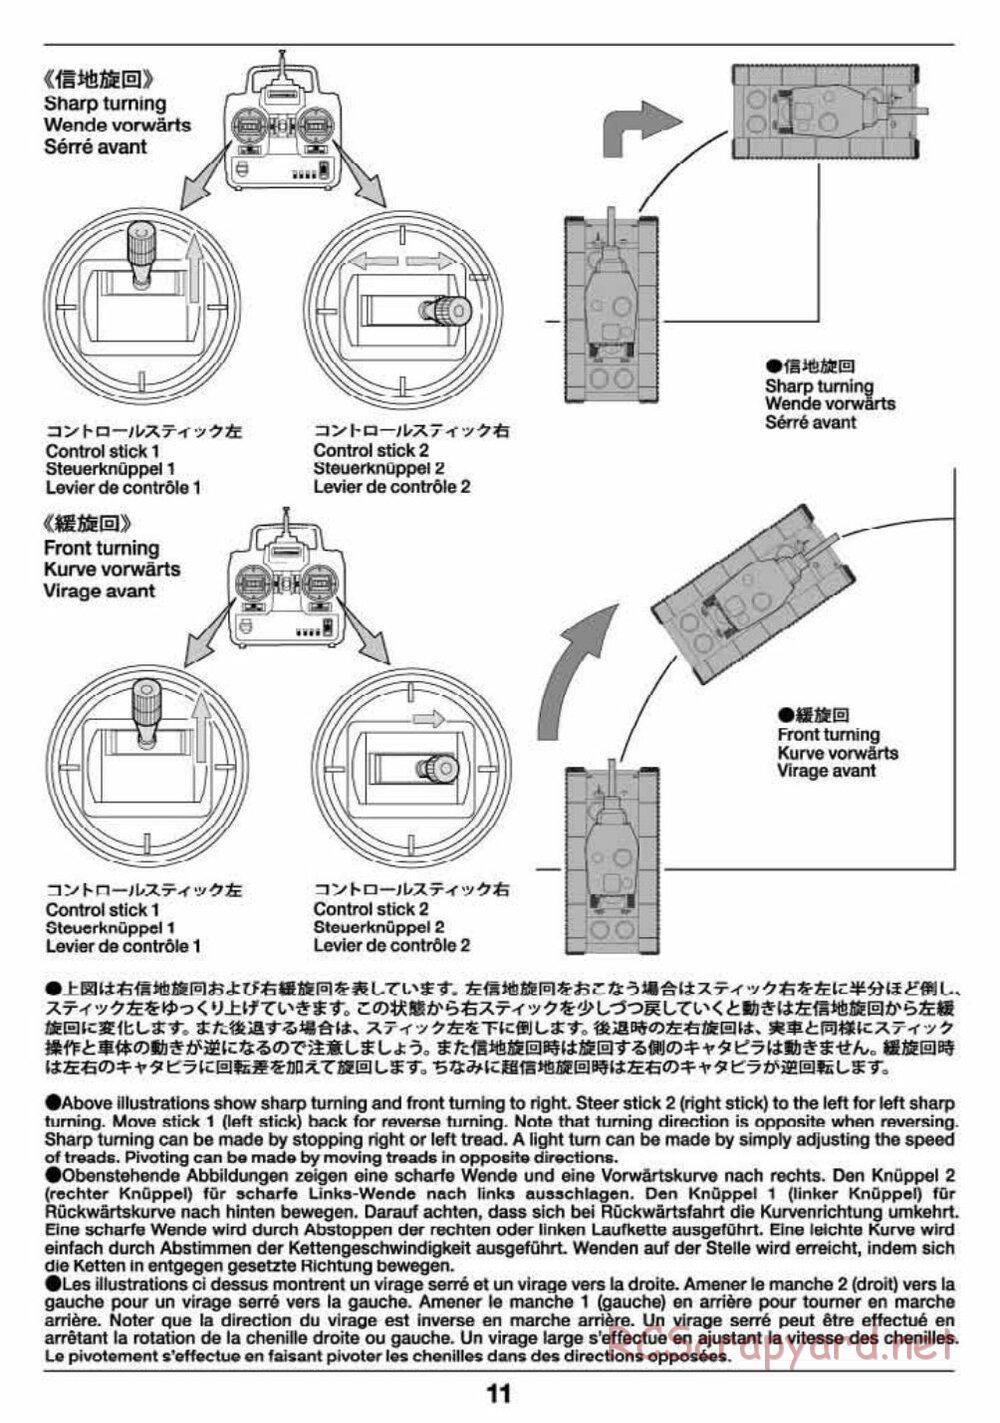 Tamiya - Russian Heavy Tank KV-2 Gigant - 1/16 Scale Chassis - Operation Manual - Page 11